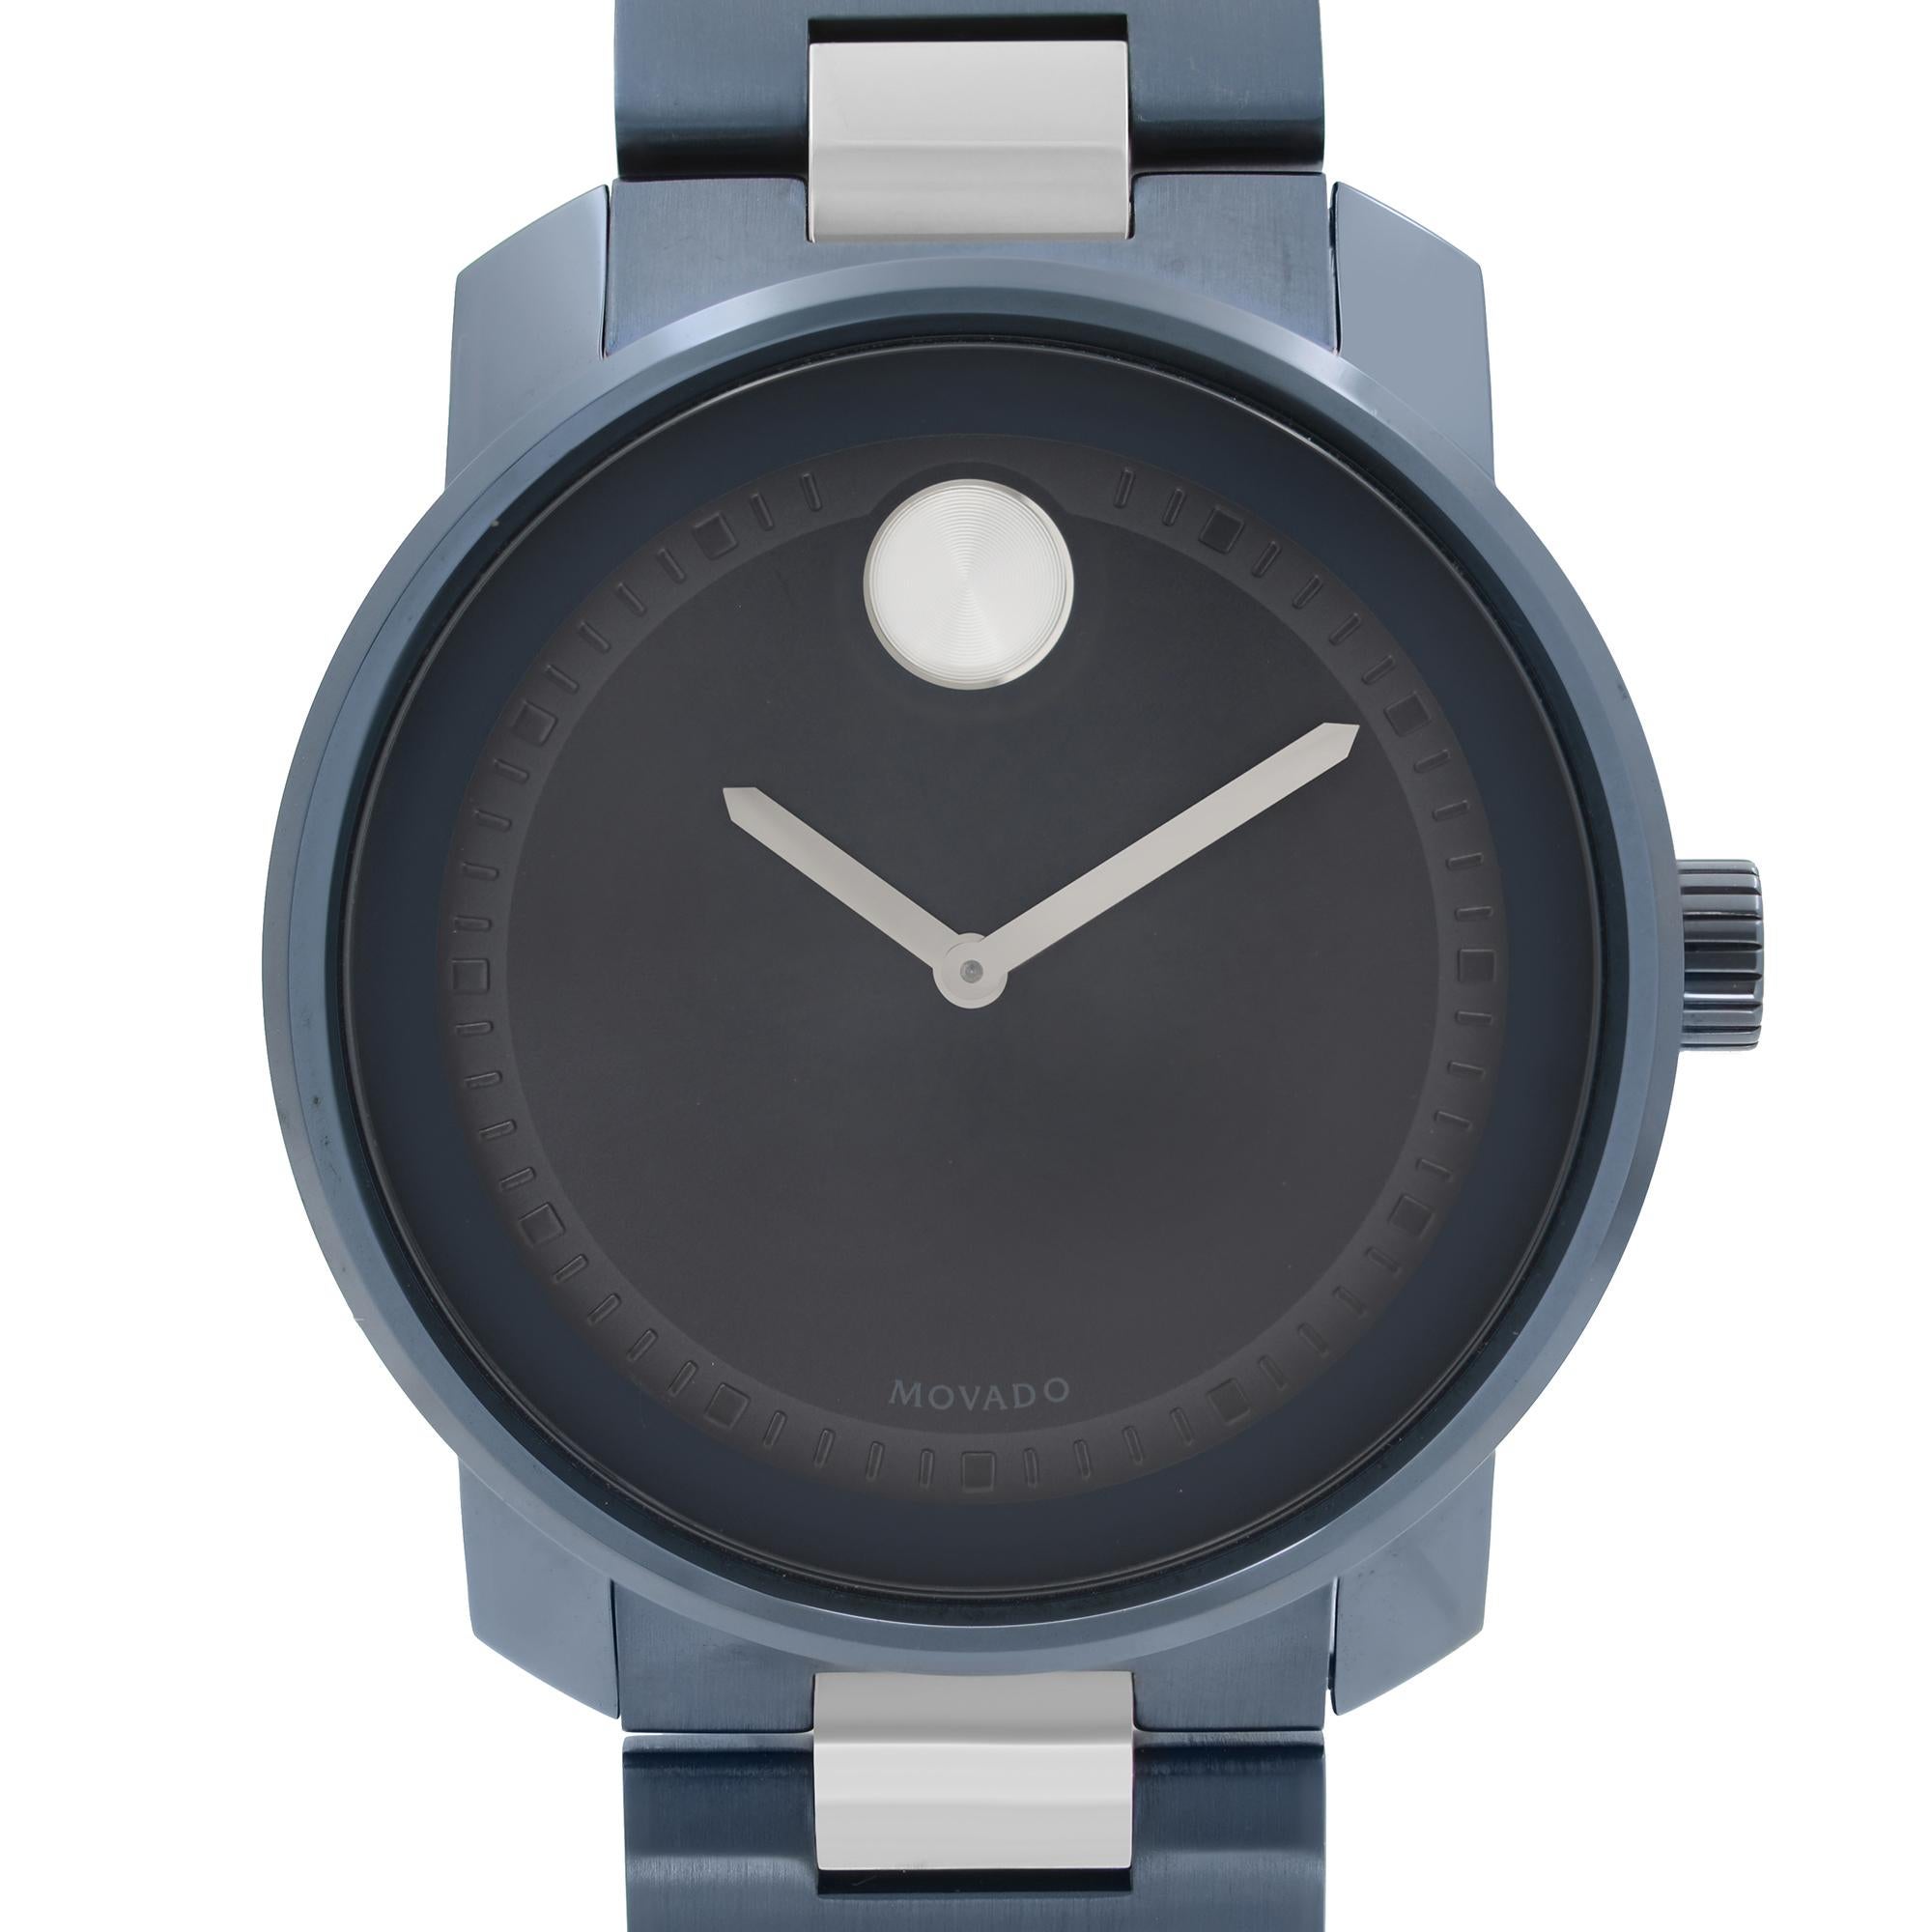 New with Defects Movado Bold Stainless Steel Blue Dial Men's Quartz Watch 3600422. The Watch has minor scratches on the case, bracelet and bezel, and tiny scratch on the crystal. This Beautiful Timepiece is Powered by Quartz (Battery) Movement And